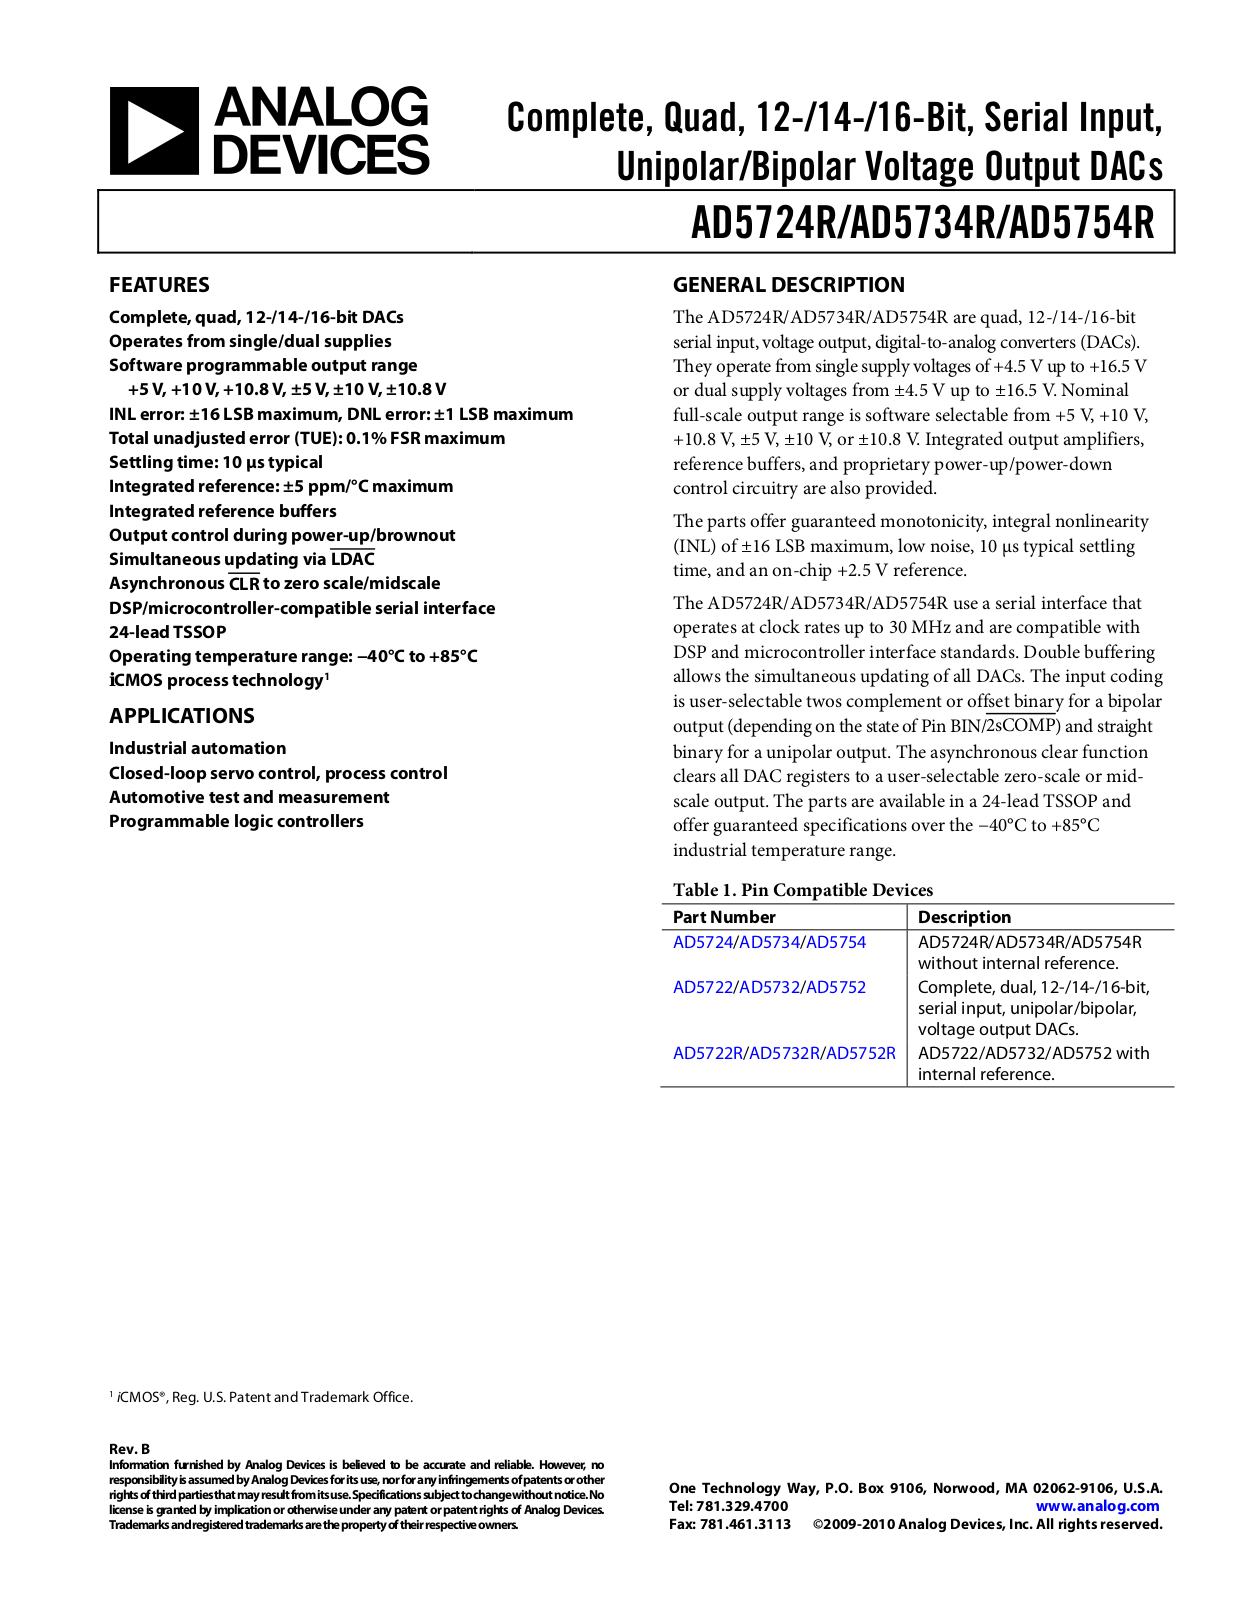 ANALOG DEVICES AD5724R, AD5734R, AD5754R Service Manual